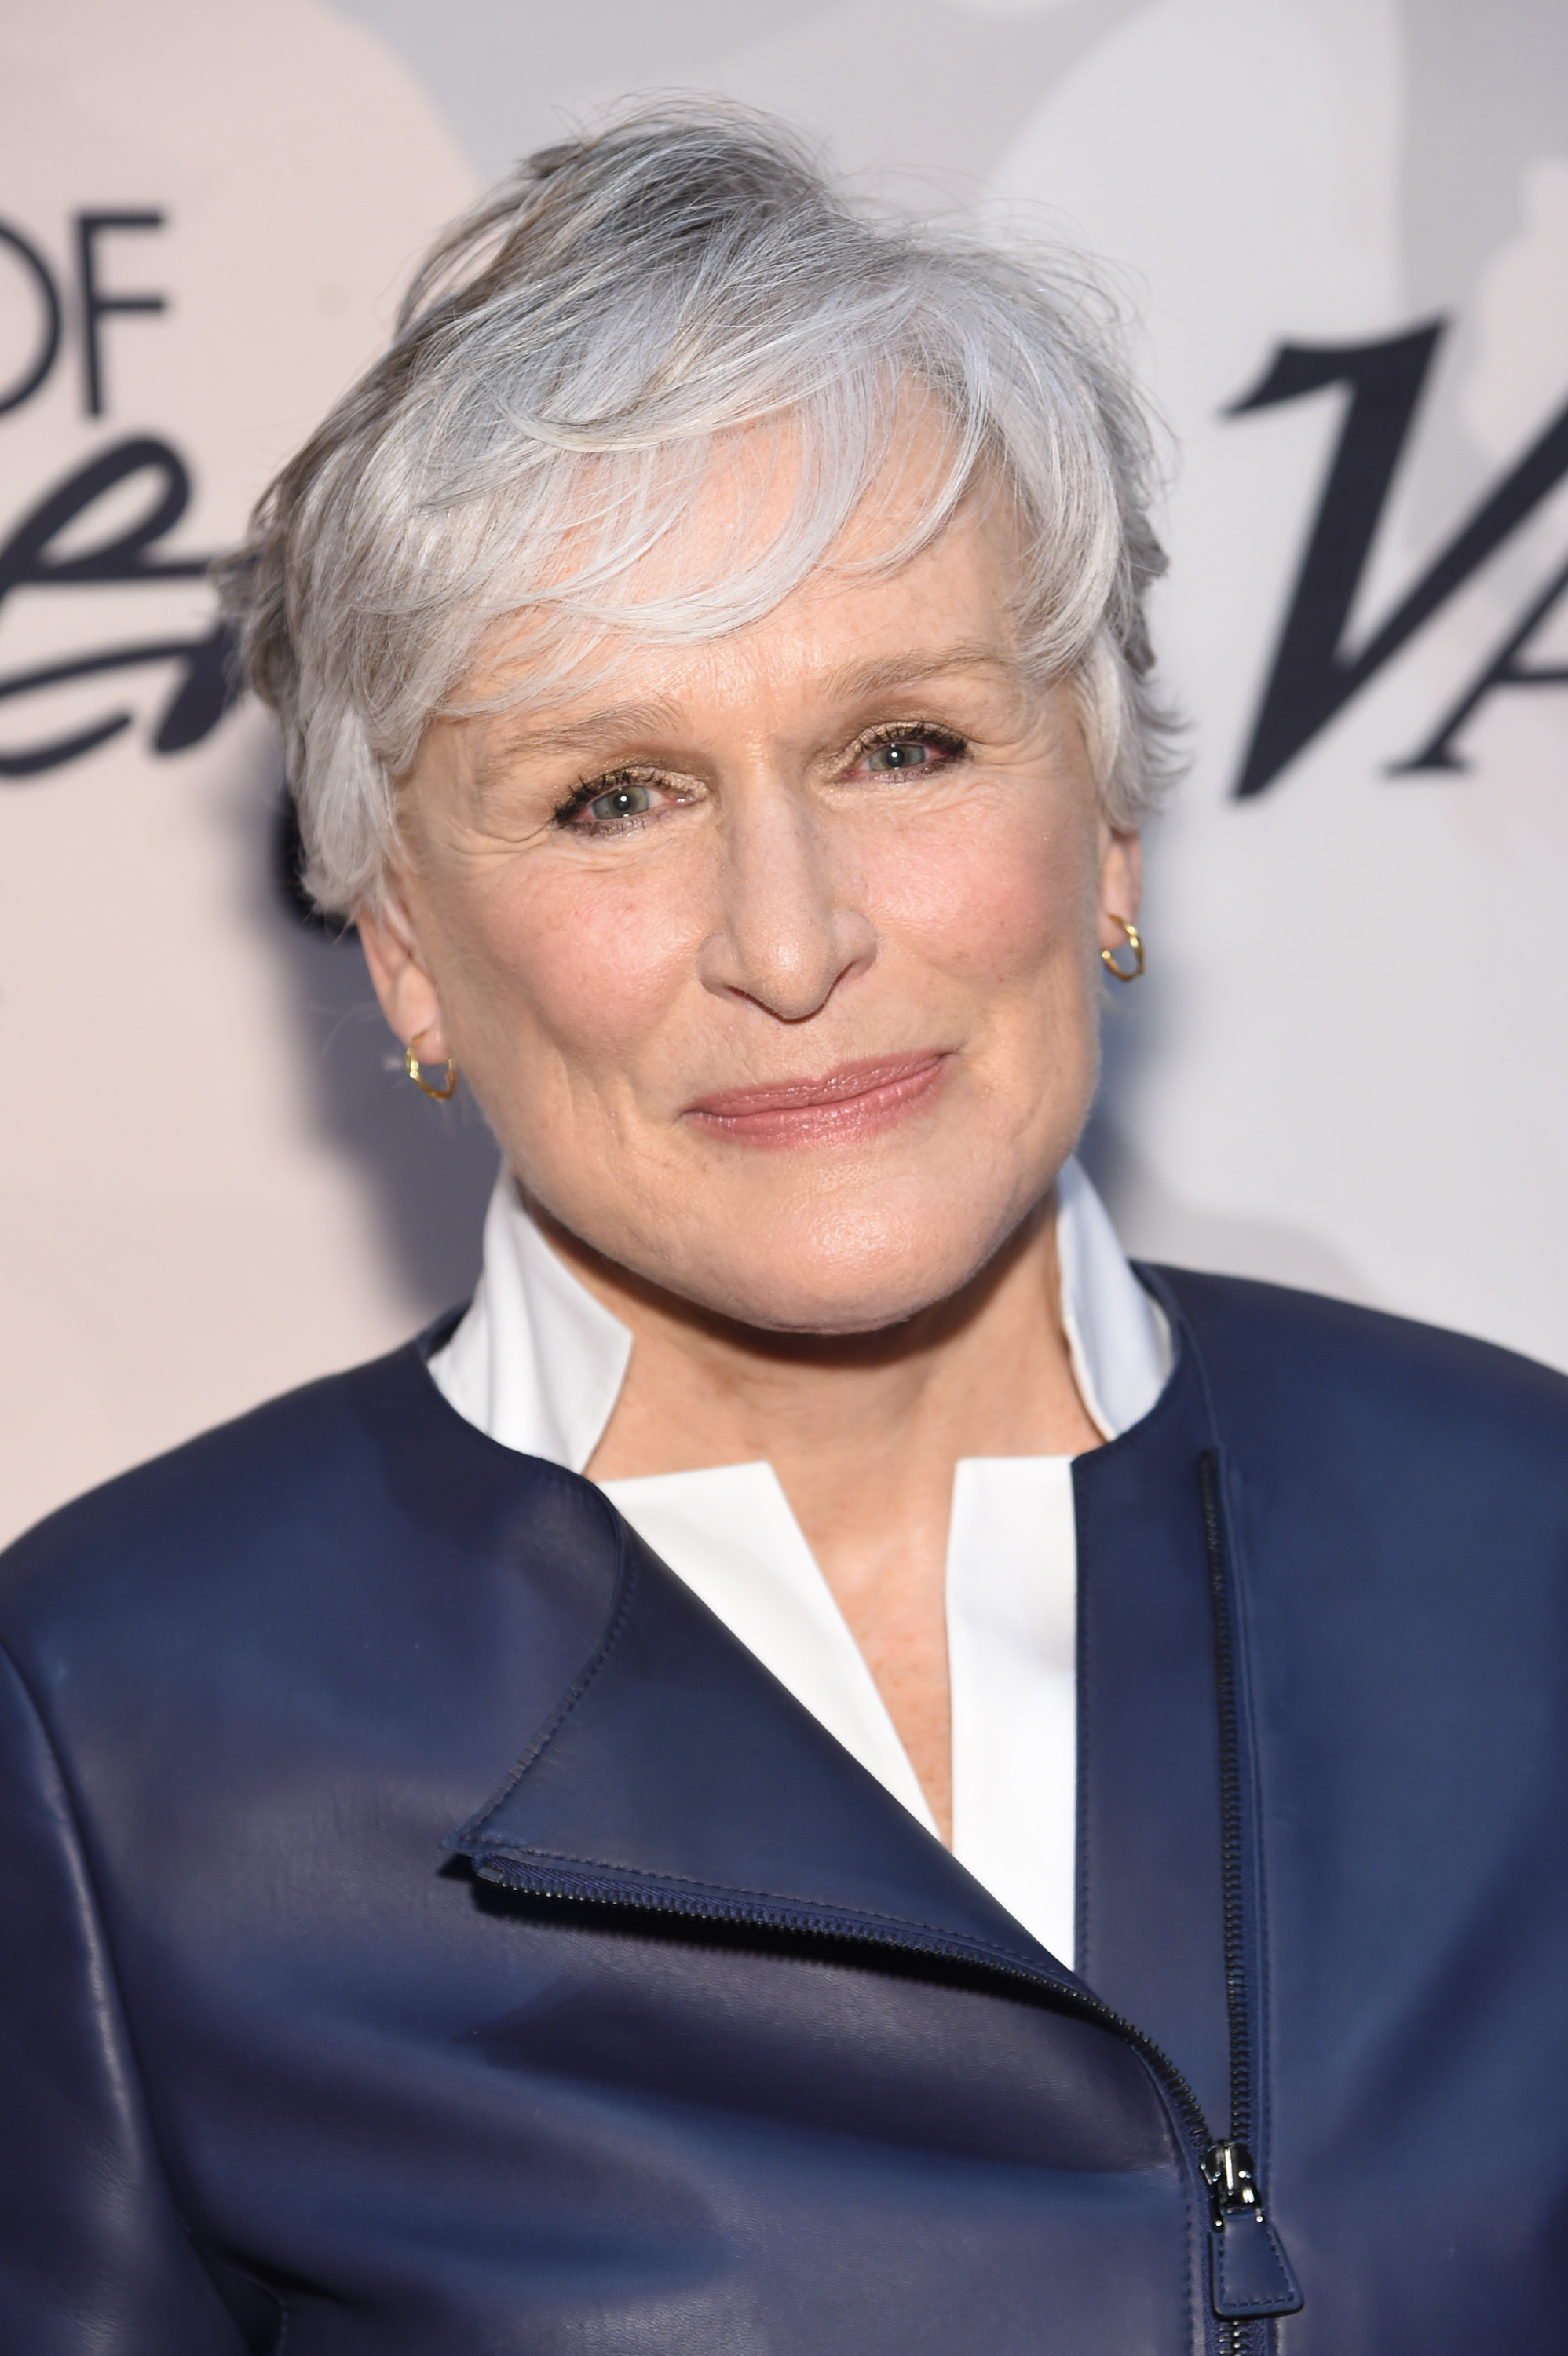 Glenn Close, husband divorce after 9 years of marriage